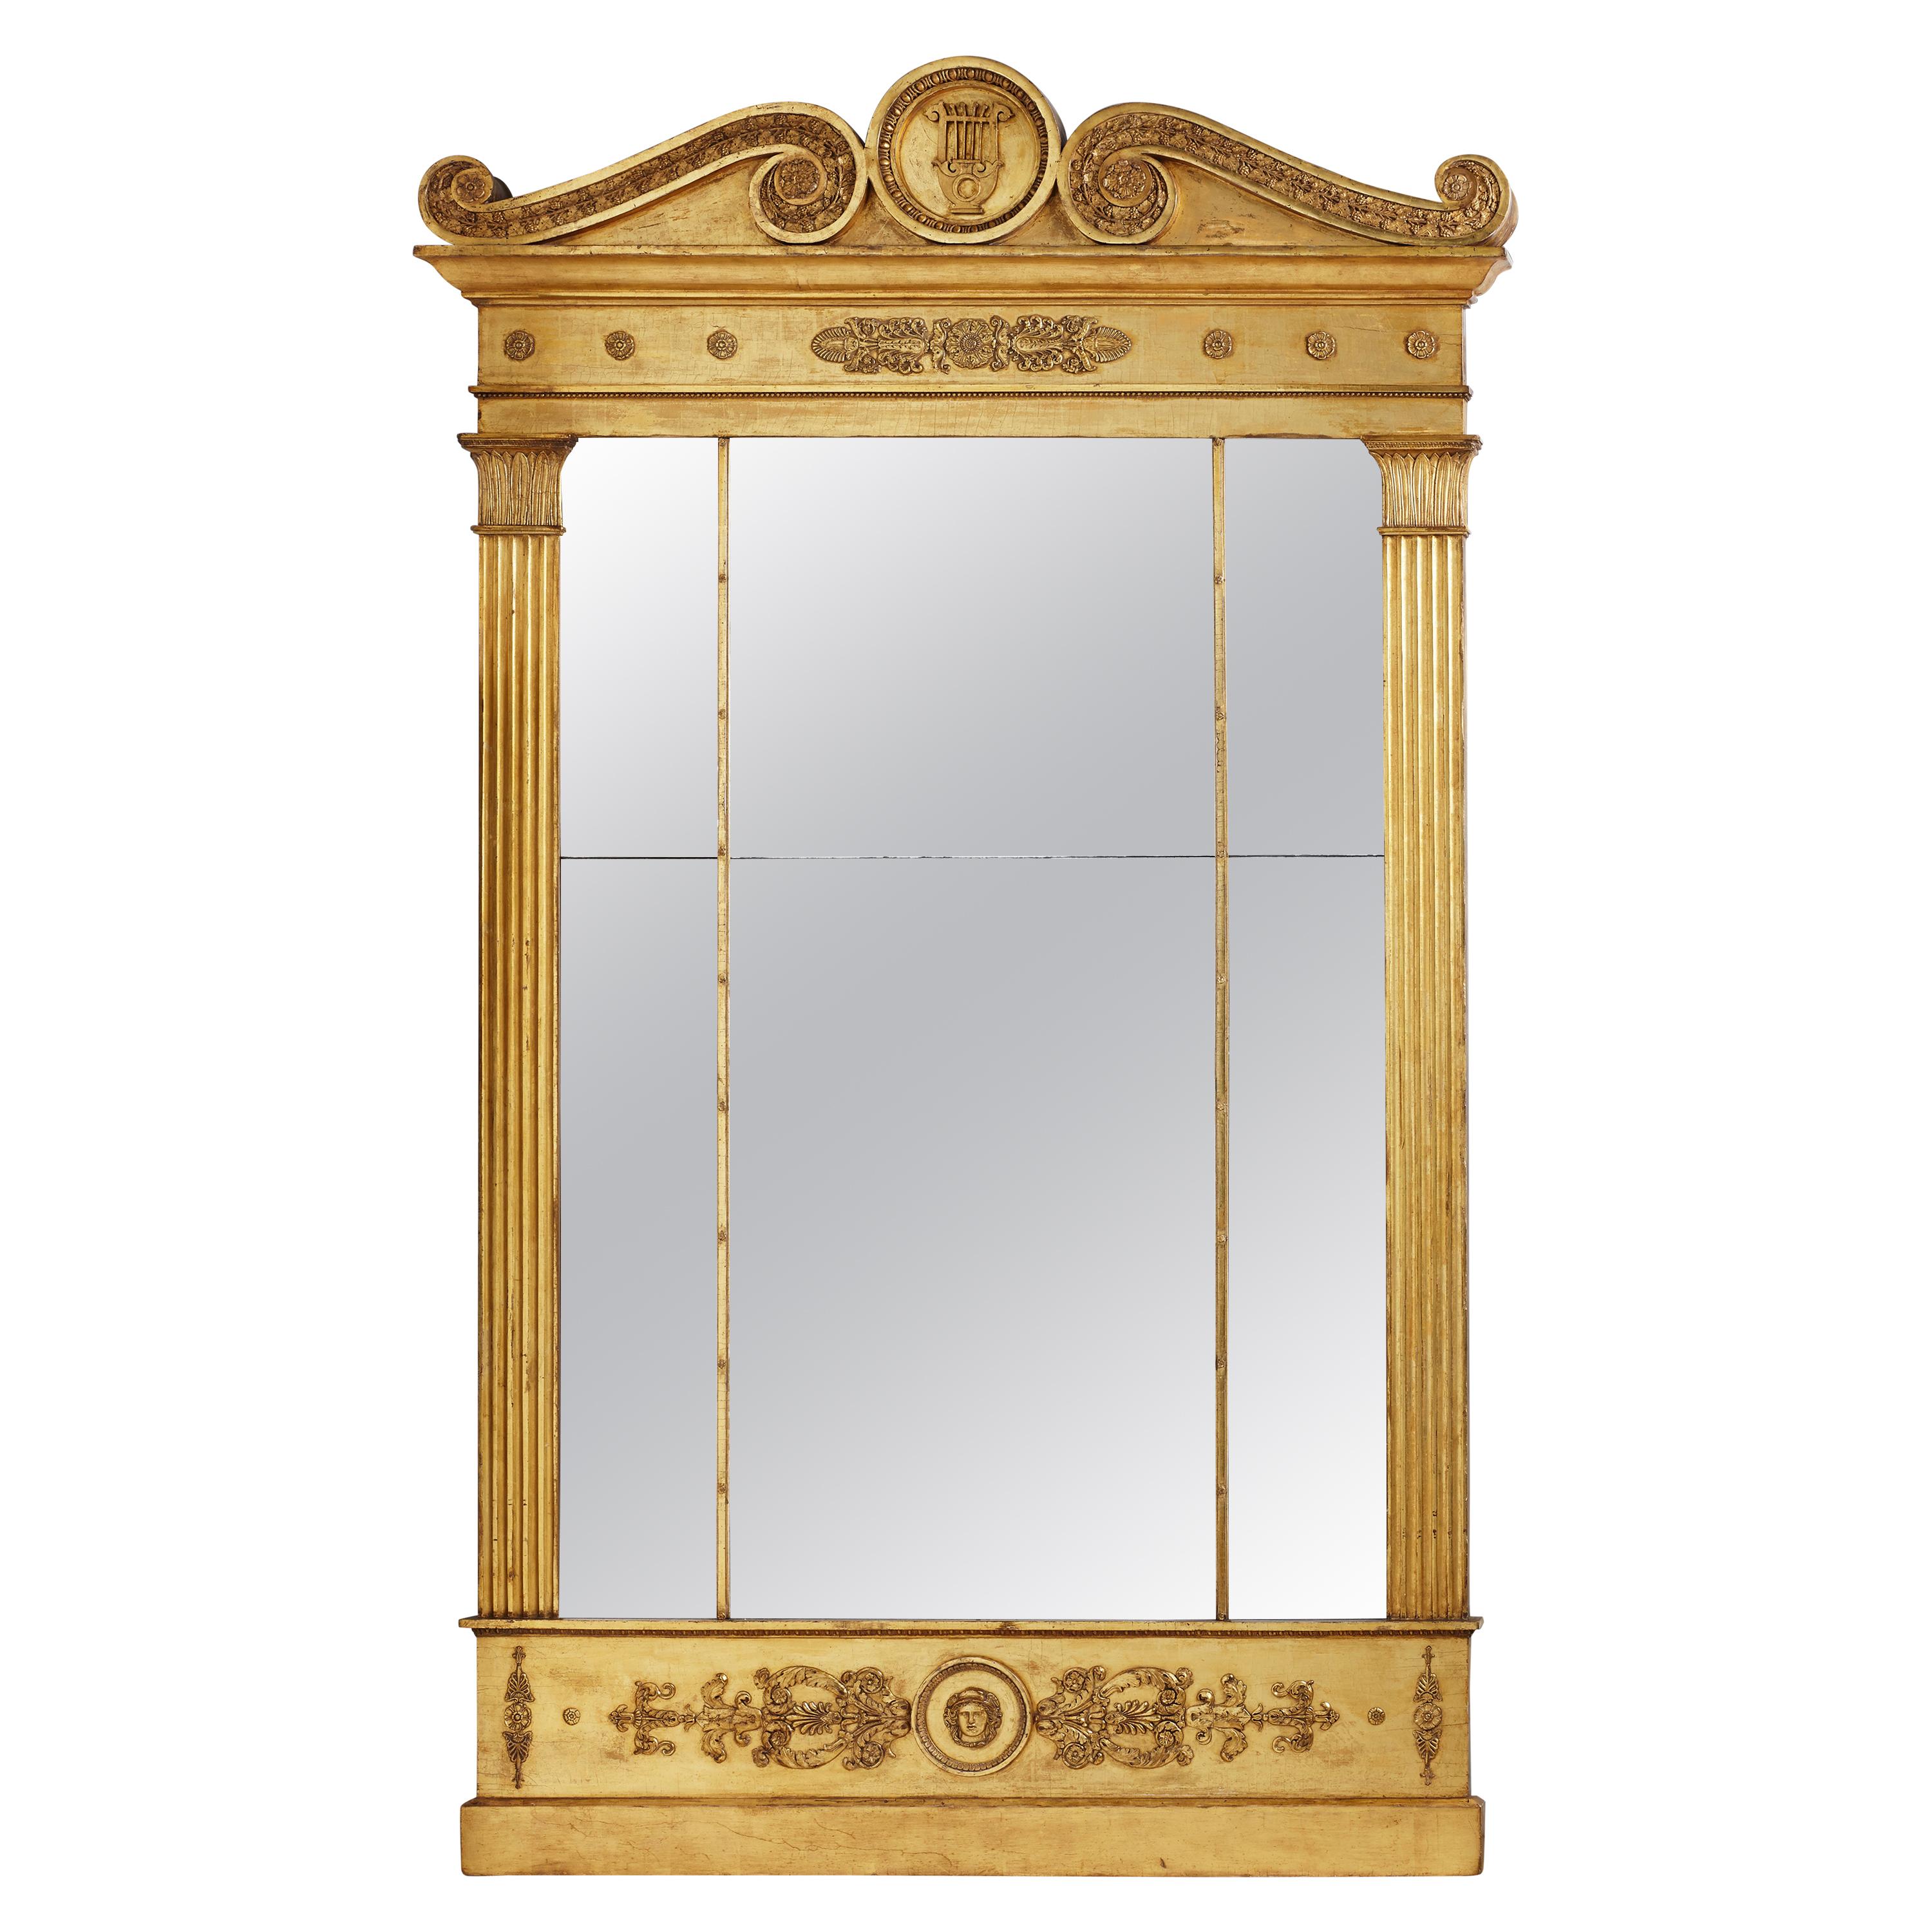 Impressive Royal Early 19th Century German Empire Mirror For Sale